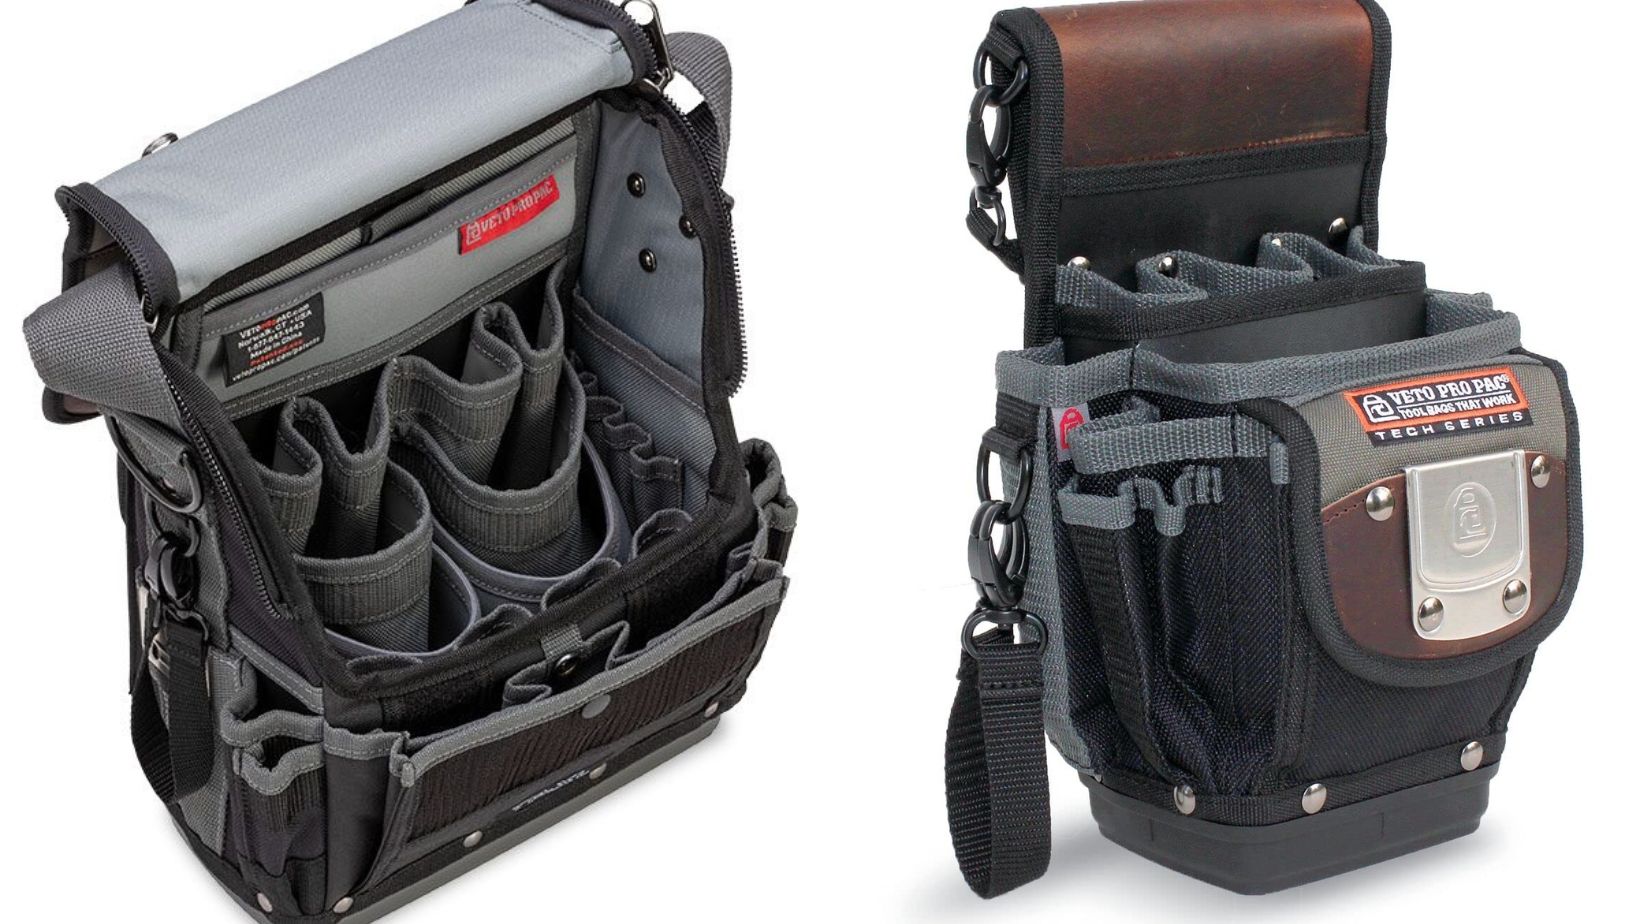 Two well constructed veto pro pac tool bags